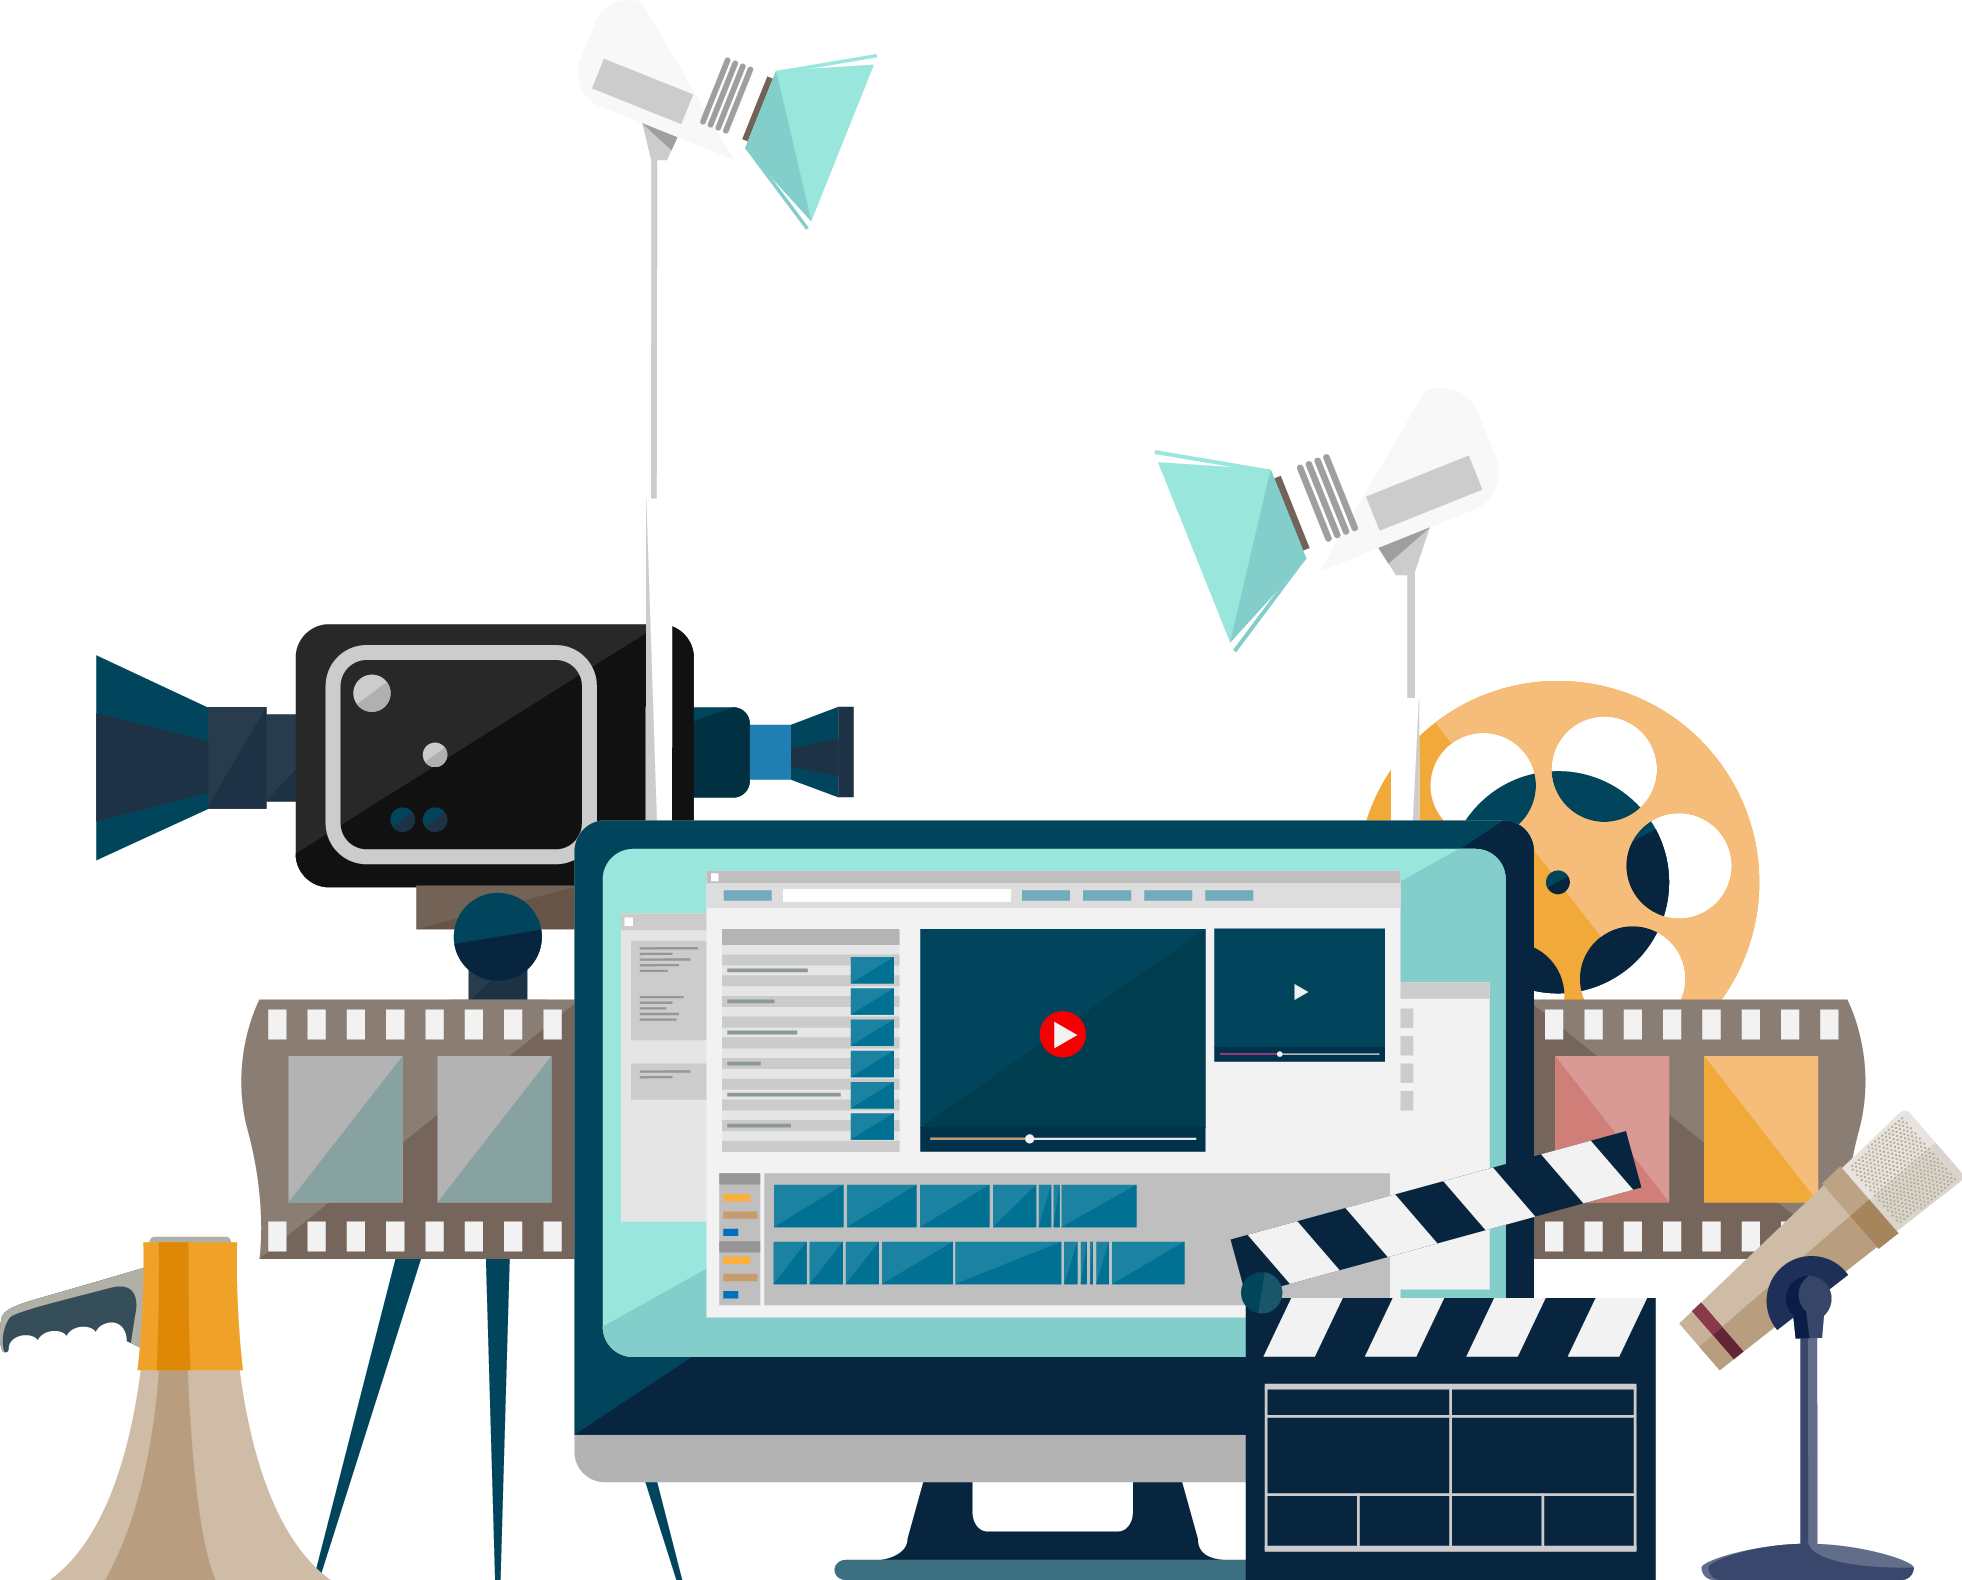 Video production and marketing agency